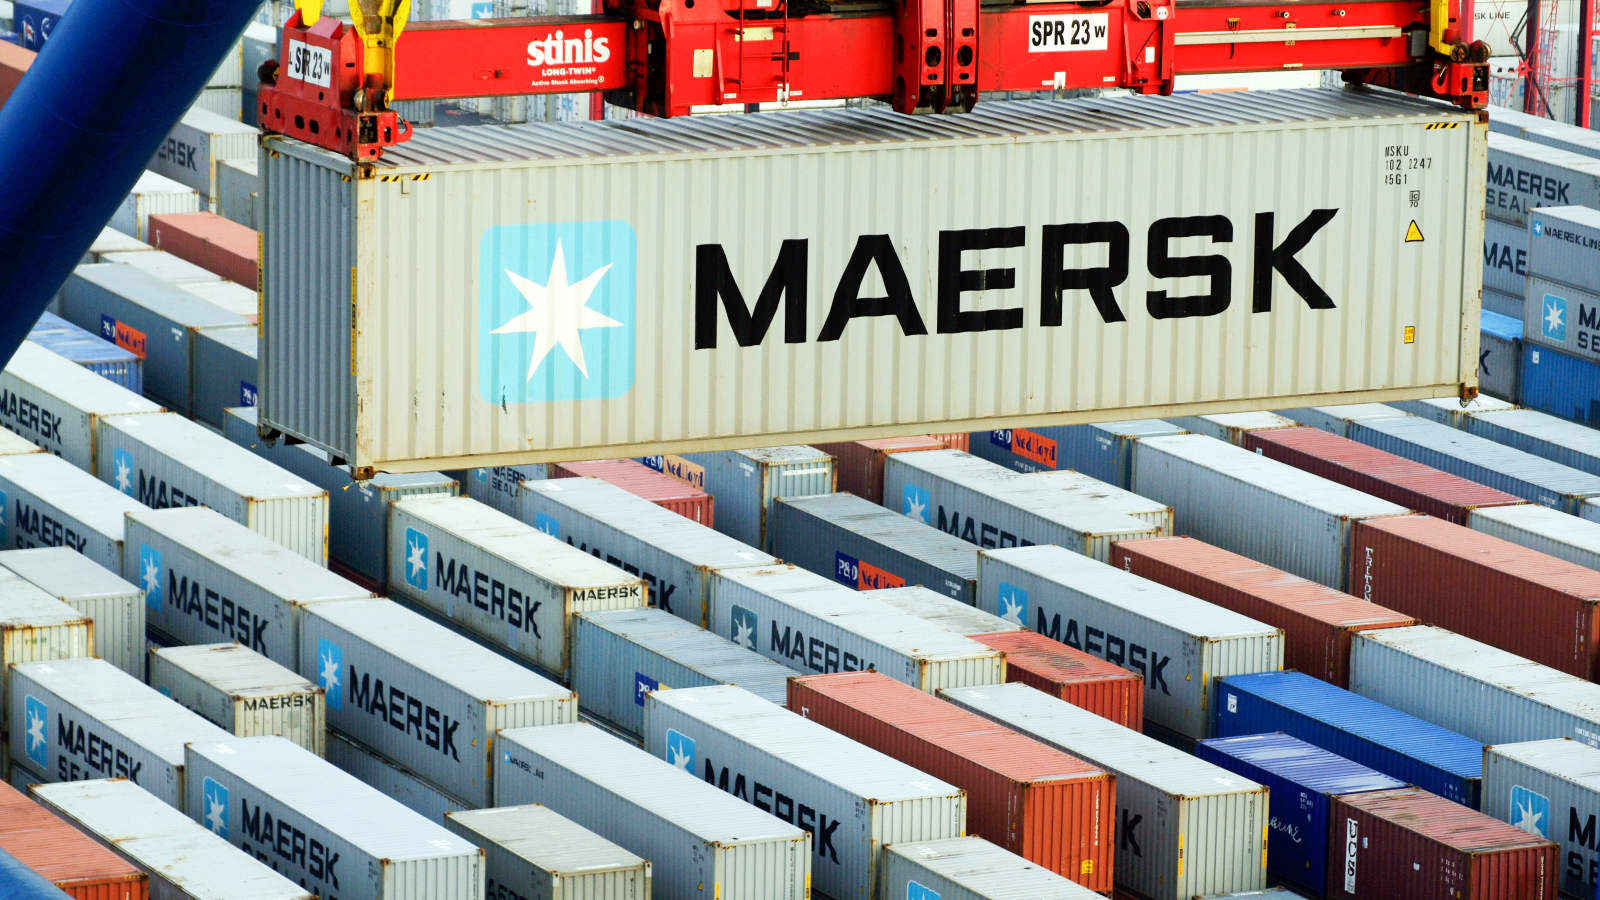 Maersk scores 4.9/5.0 on environmental reporting